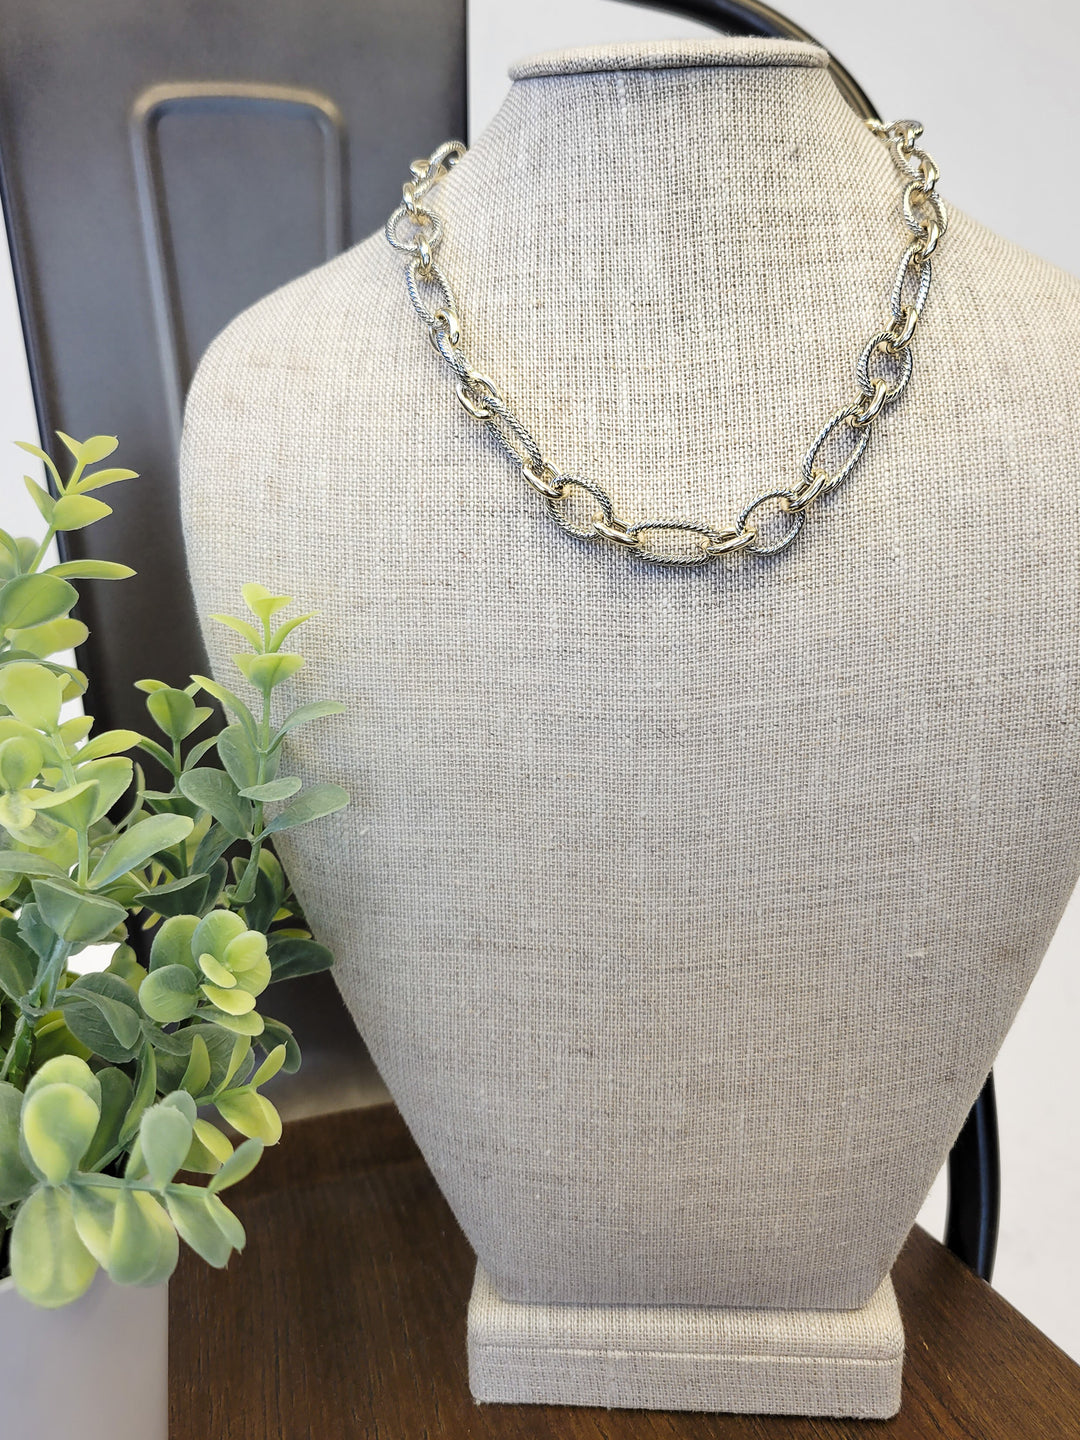 TWO TONE ROPE CHAIN LINK NECKLACE - GOLD SILVER